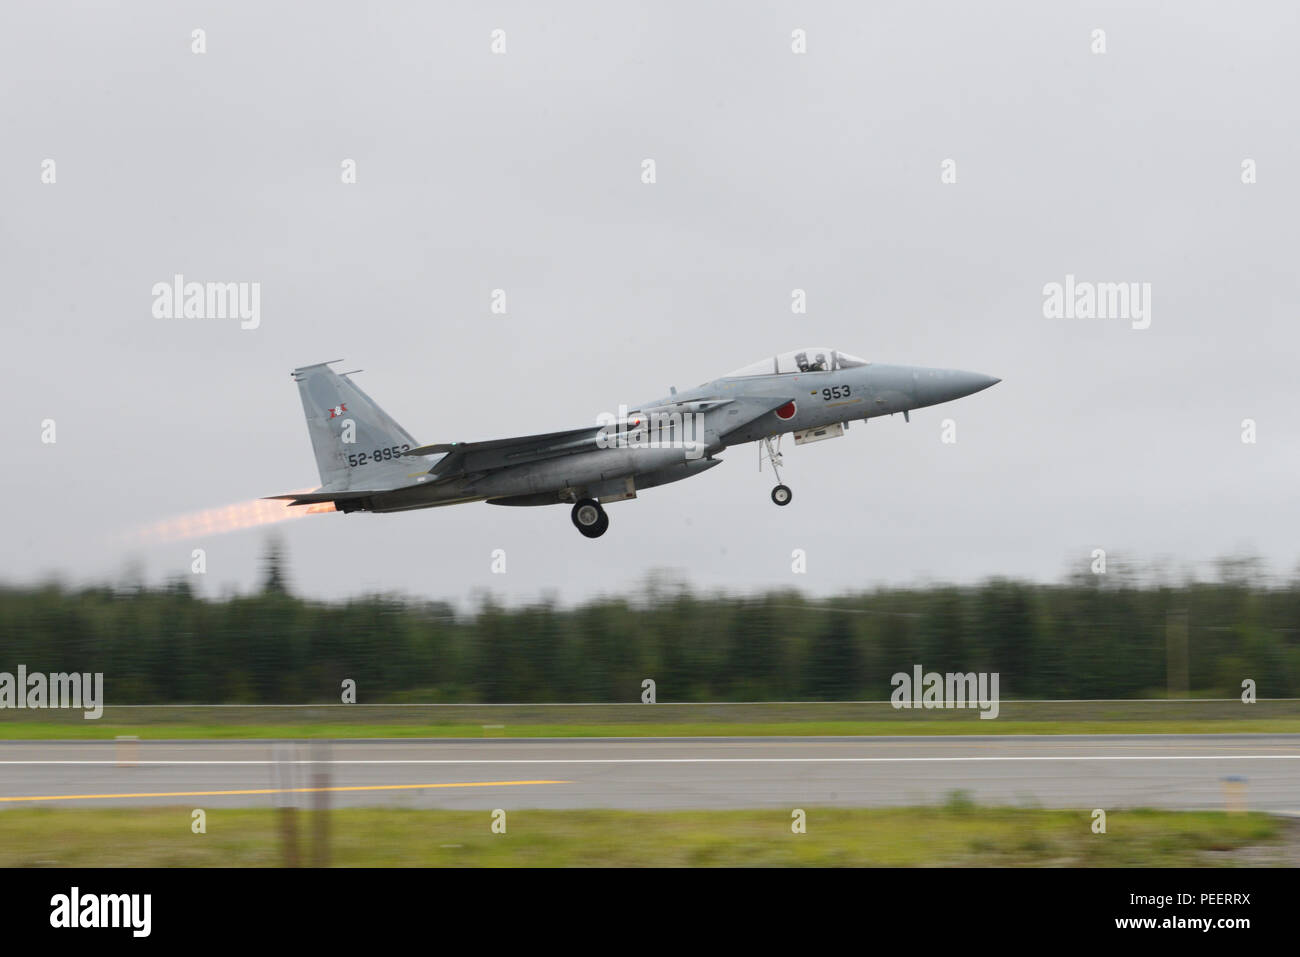 A Japanese Air Self-Defense Force F-15J Eagle takes off from Eielson Air Force Base, Alaska, Aug. 10, 2015, during Red Flag-Alaska (RF-A) 15-3. RF-A is a series of Pacific Air Forces commander-directed field training exercises for U.S. and partner nation forces, providing combined offensive counter-air, interdiction, close air support and large force employment training in a simulated combat environment. (U.S. Air Force photo by Senior Airman Ashley Nicole Taylor/Released) Stock Photo